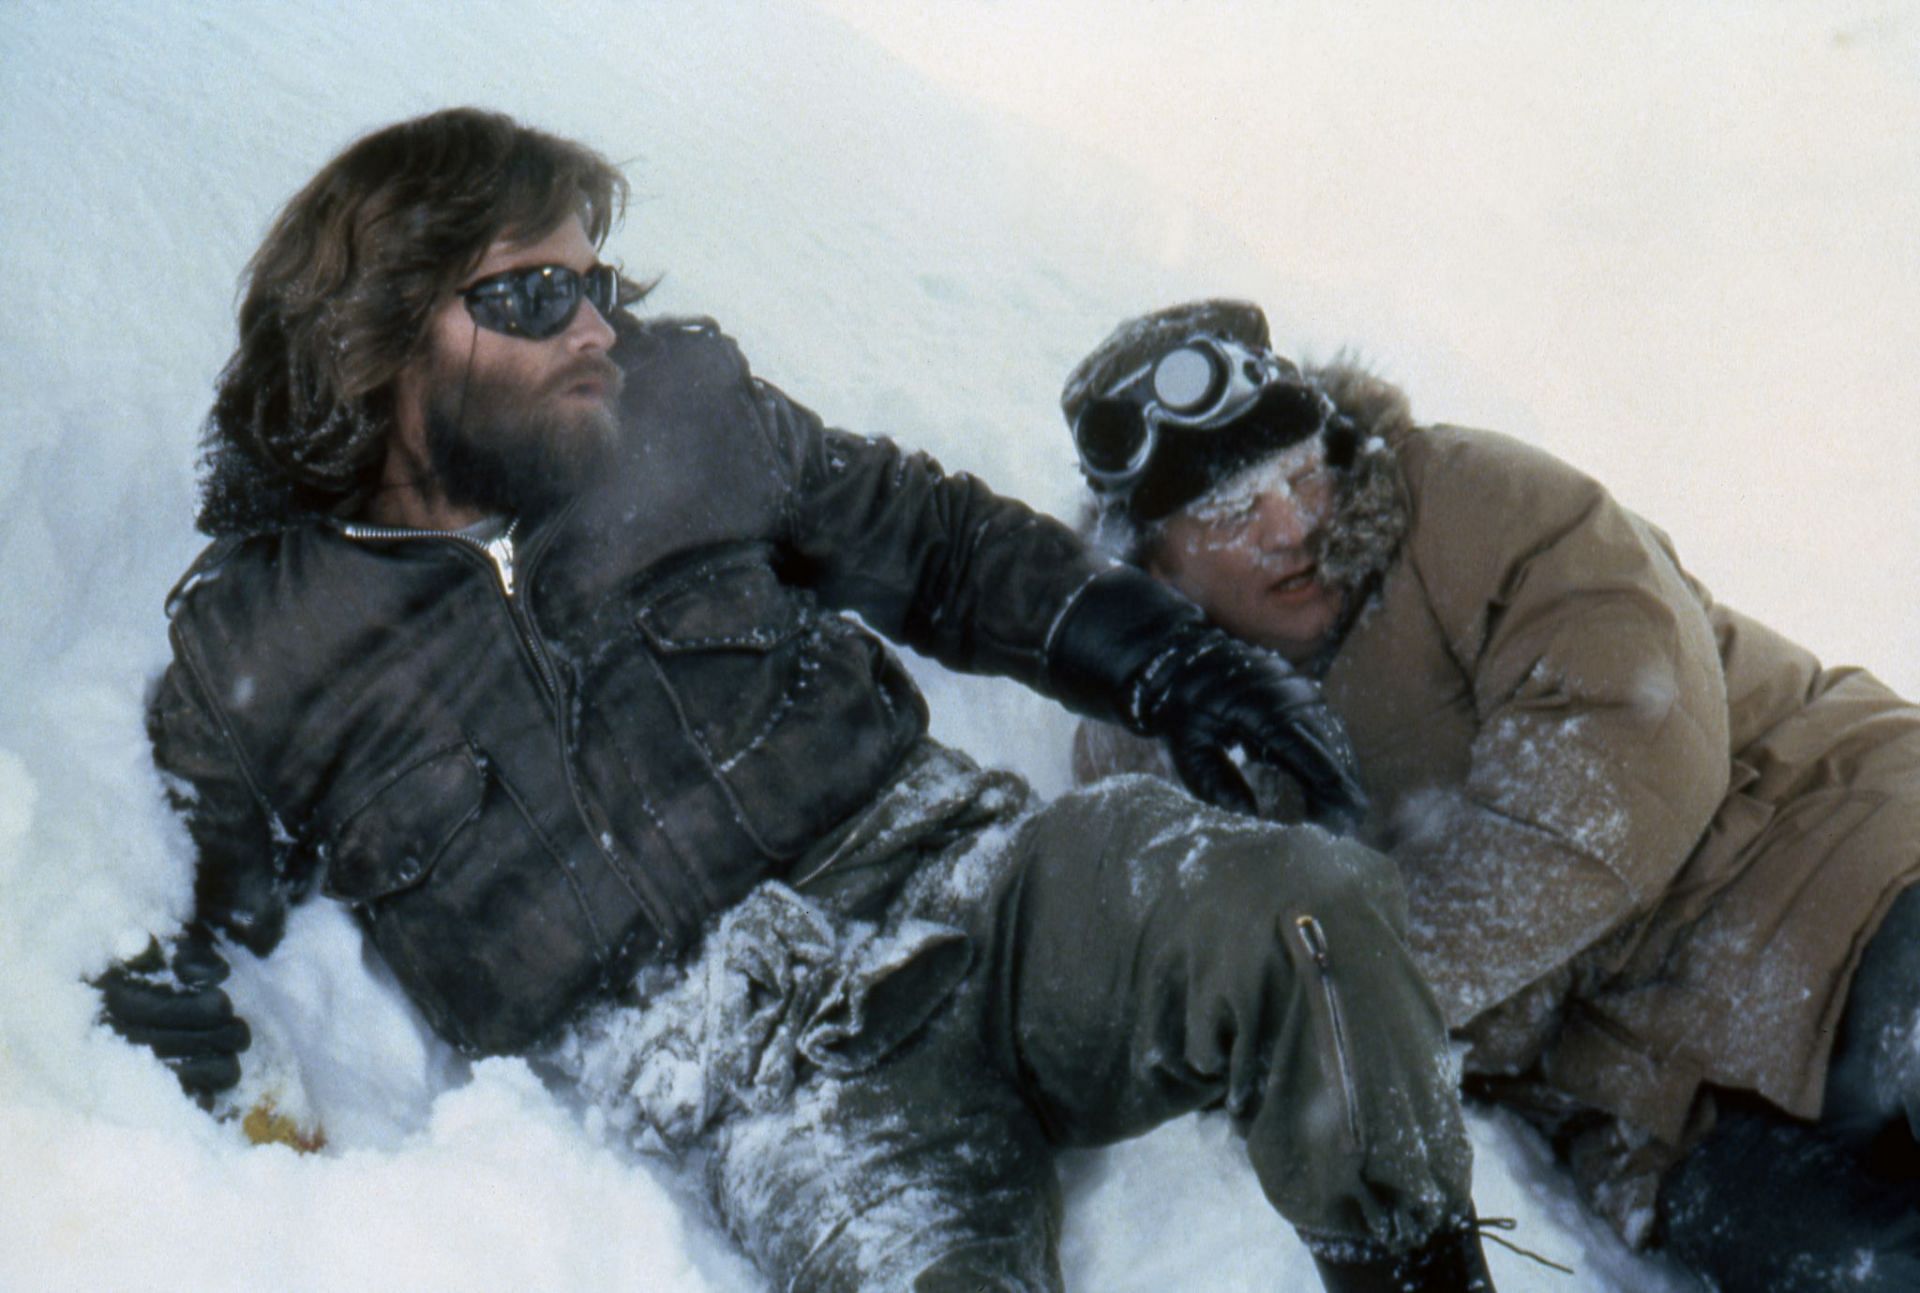 A still from The Thing (image via Universal Studios)